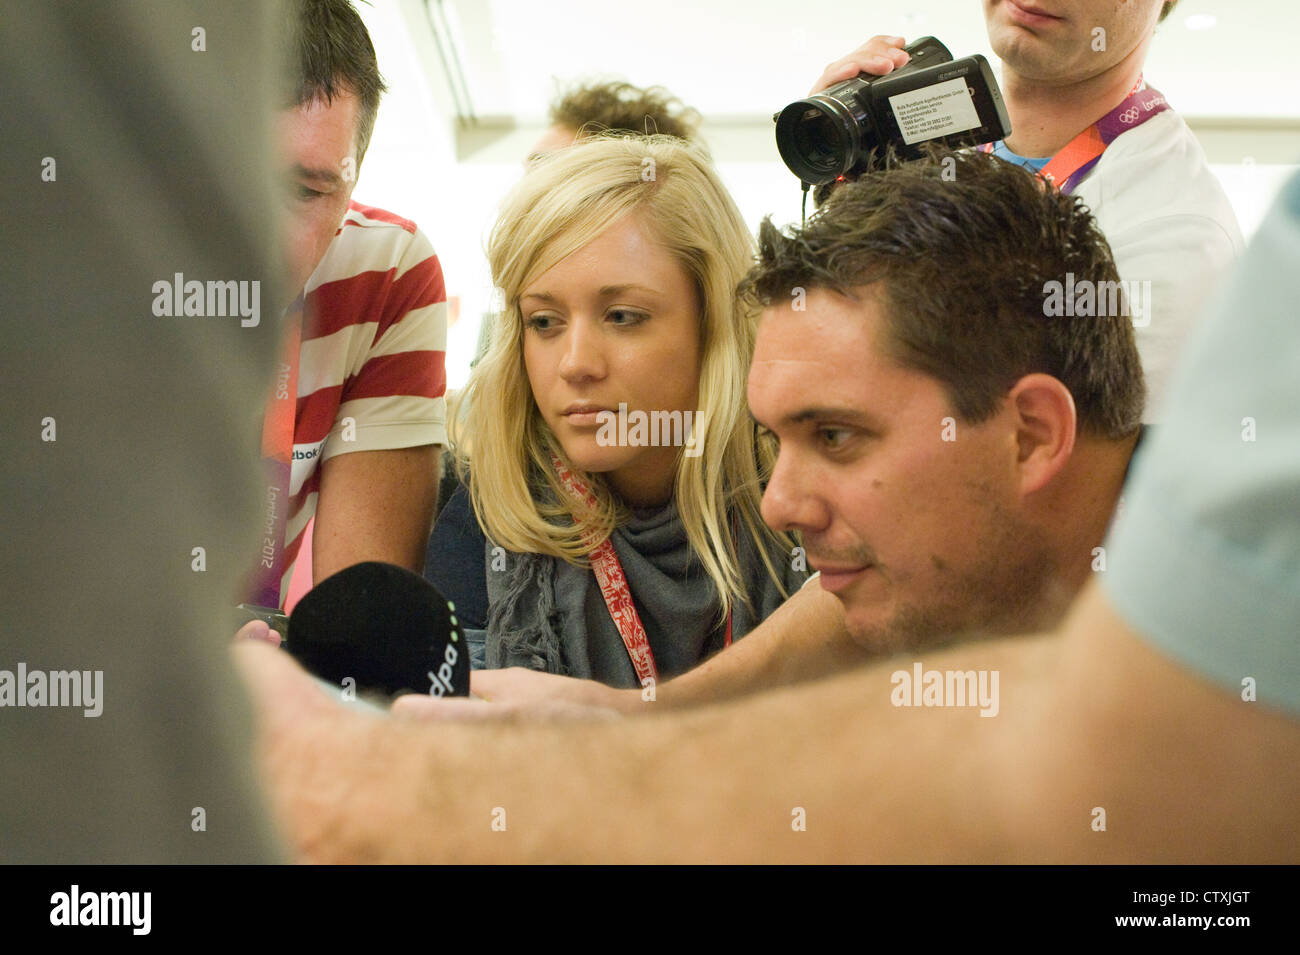 London, August 5, 2012. Journalists surround tennis player Roger Federer at a press conference during the 2012 Olympics Stock Photo